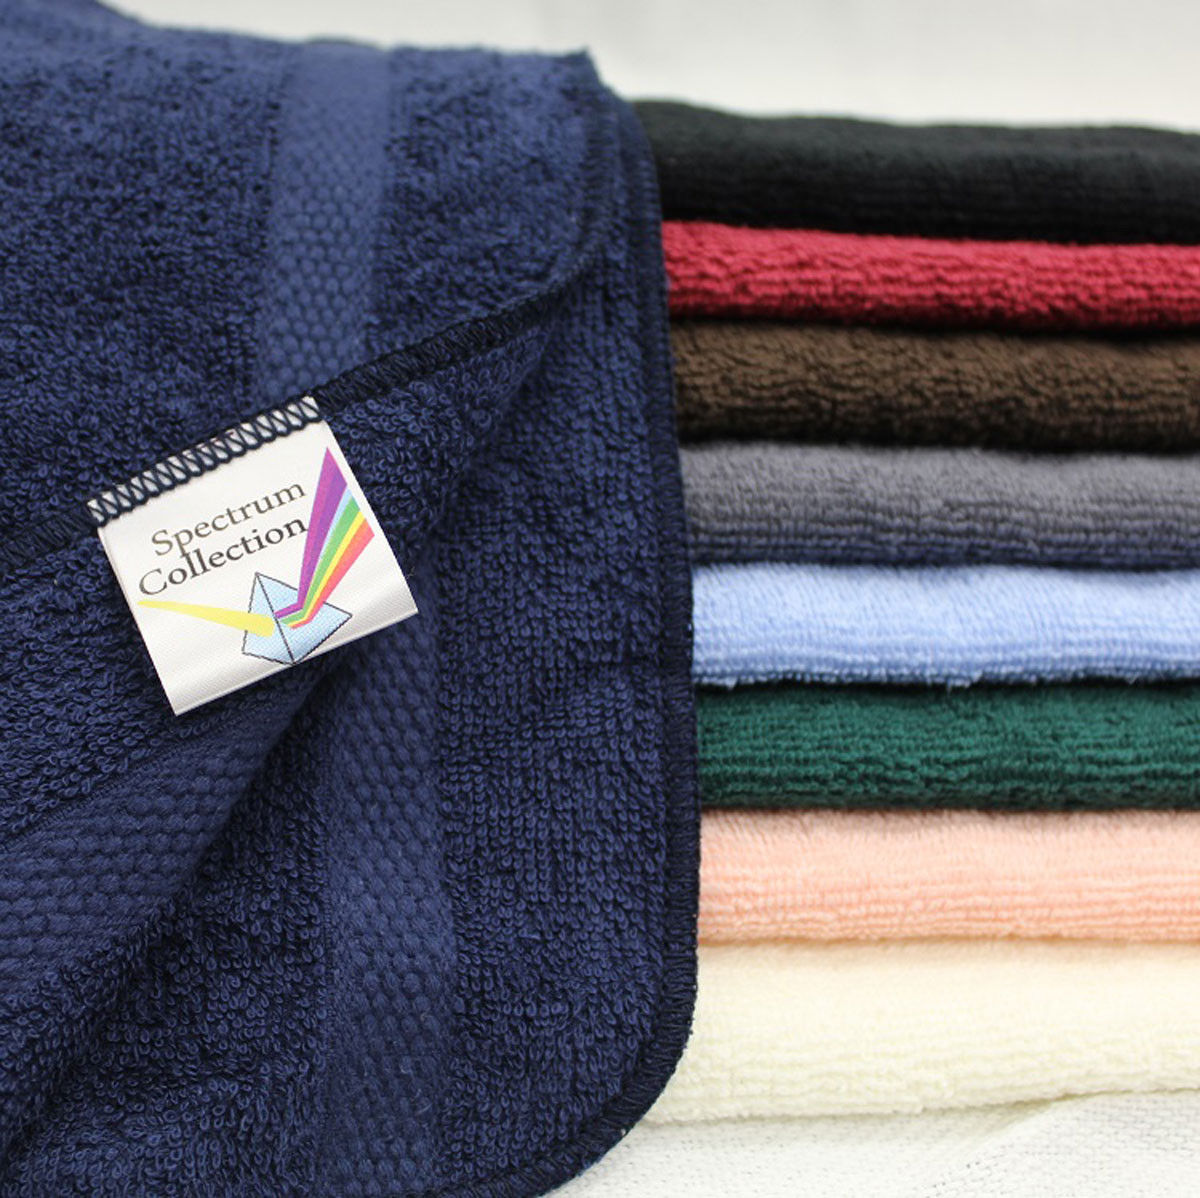 What distinguishes the design of these Spectrum Towels & Washcloths?